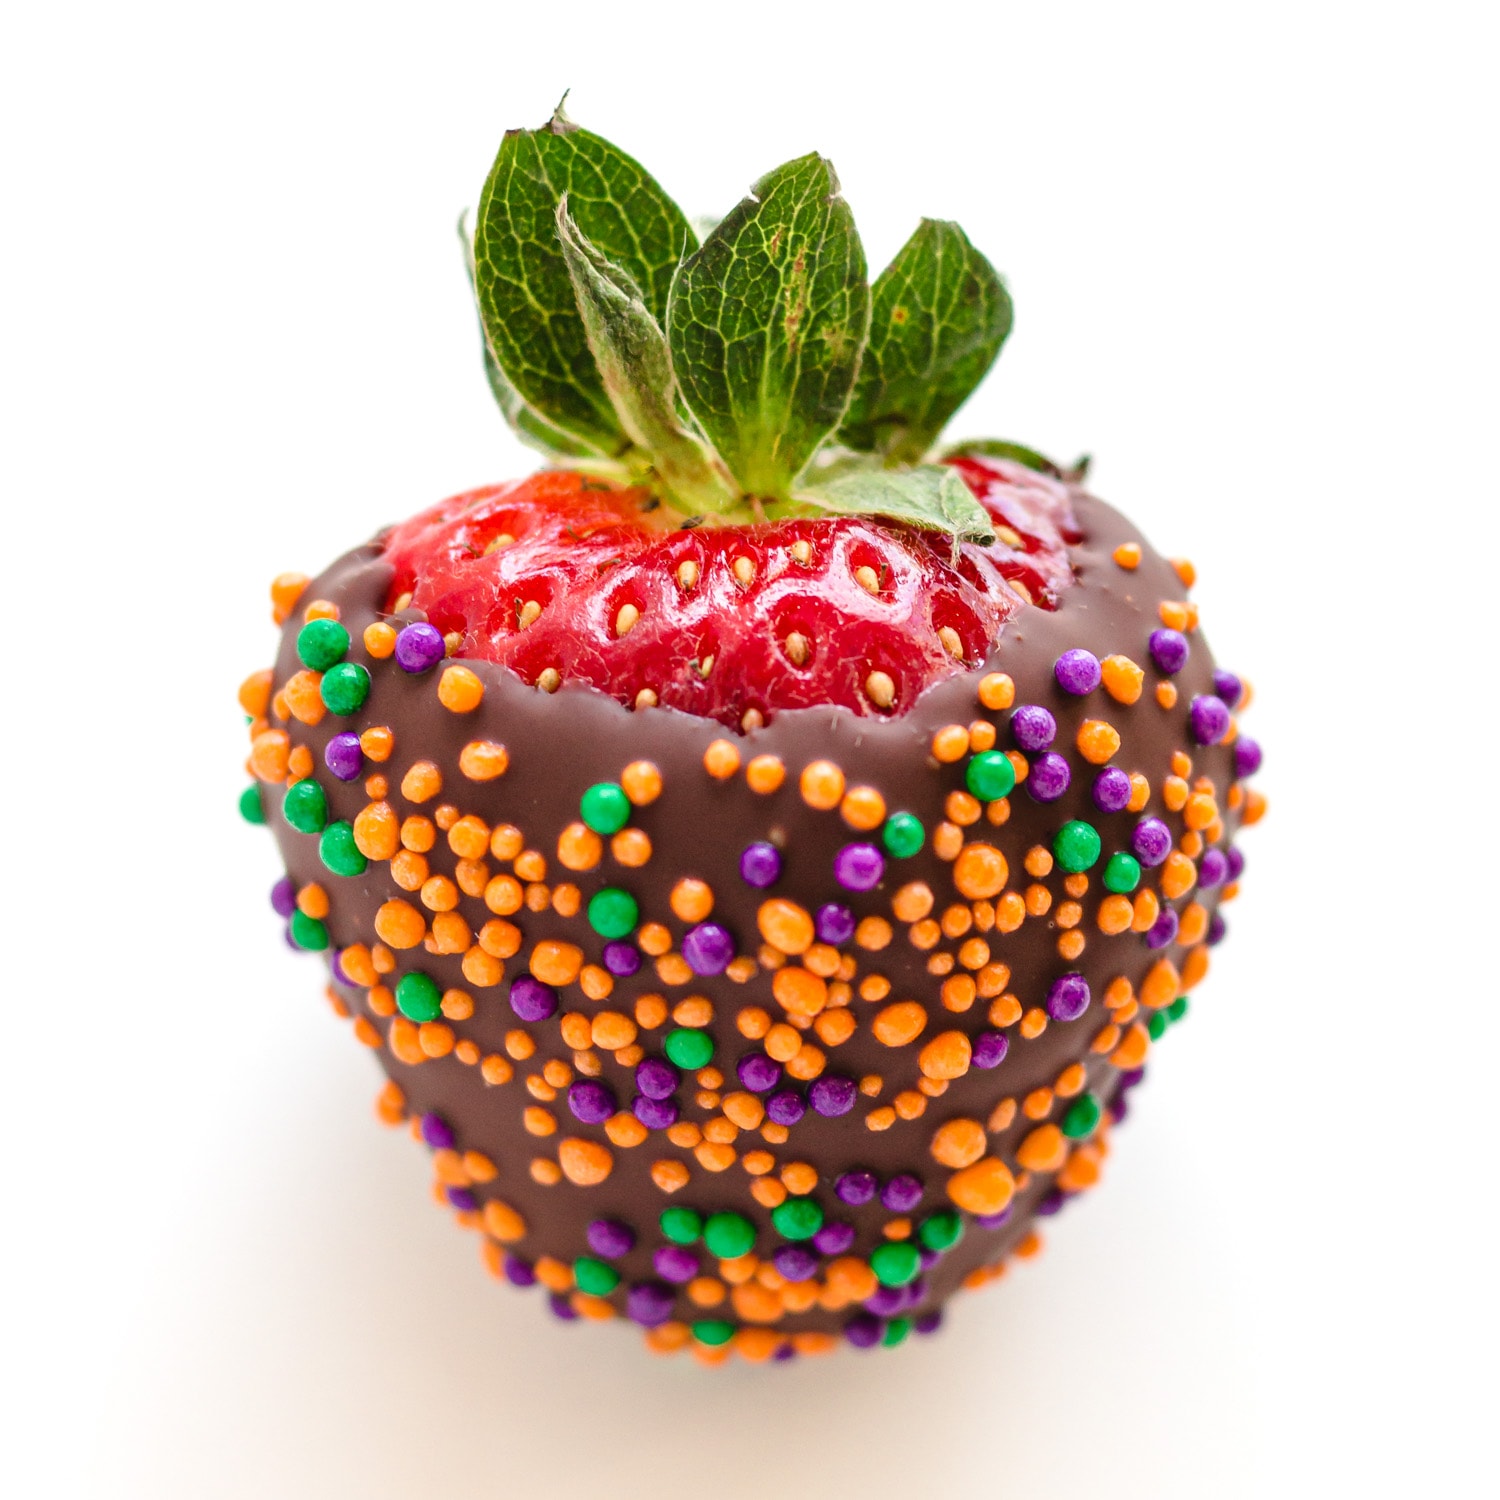 A chocolate covered strawberry covered in Halloween colored sprinkles.